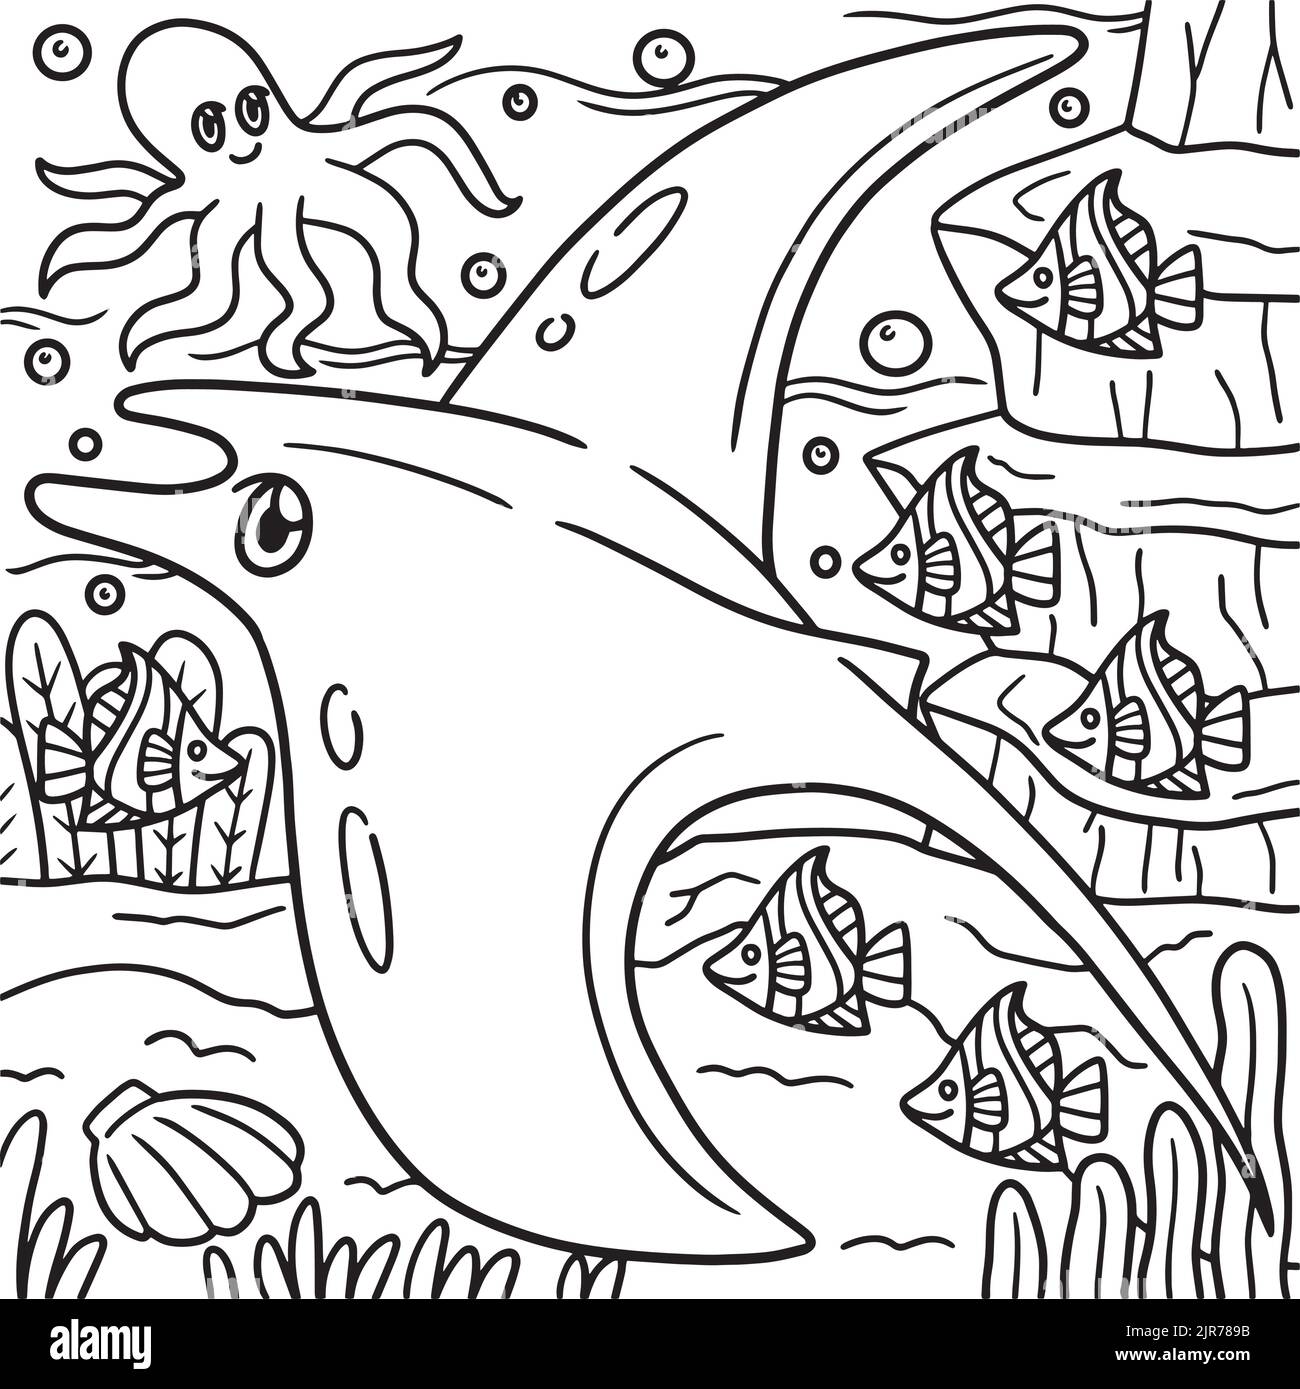 Manta Ray Coloring Page for Kids Stock Vector